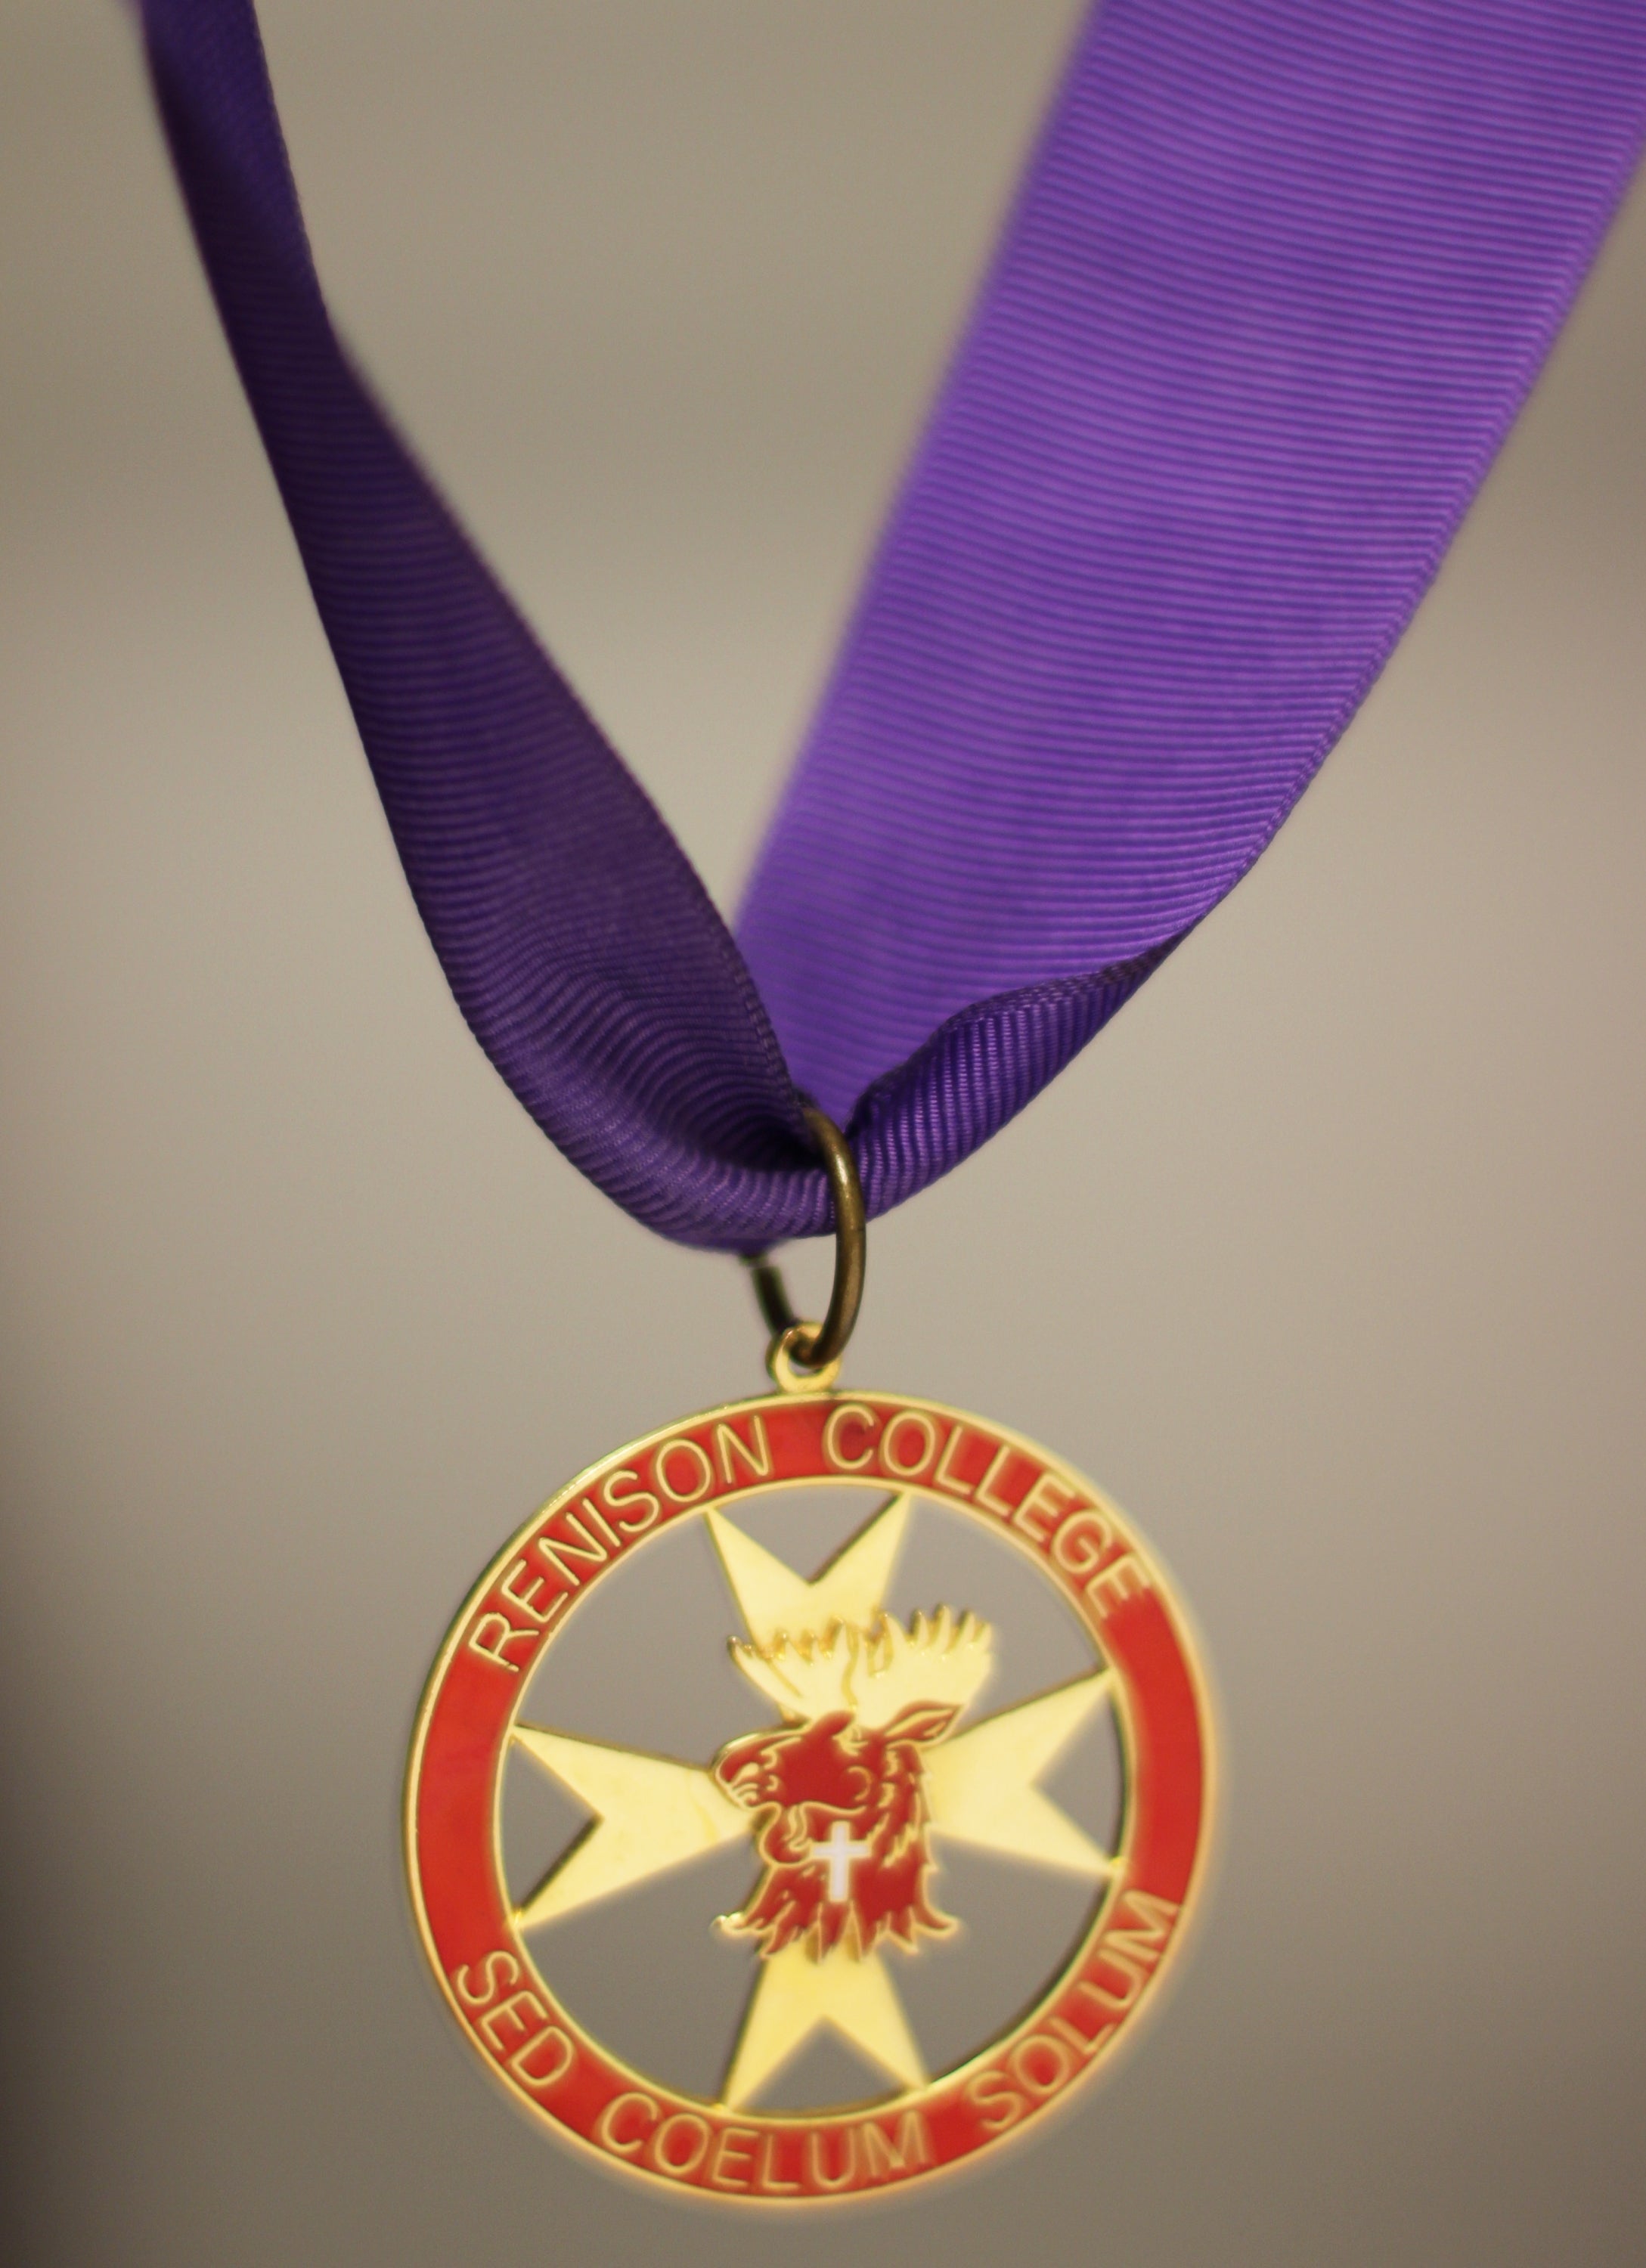 Red medal on a purple ribbon